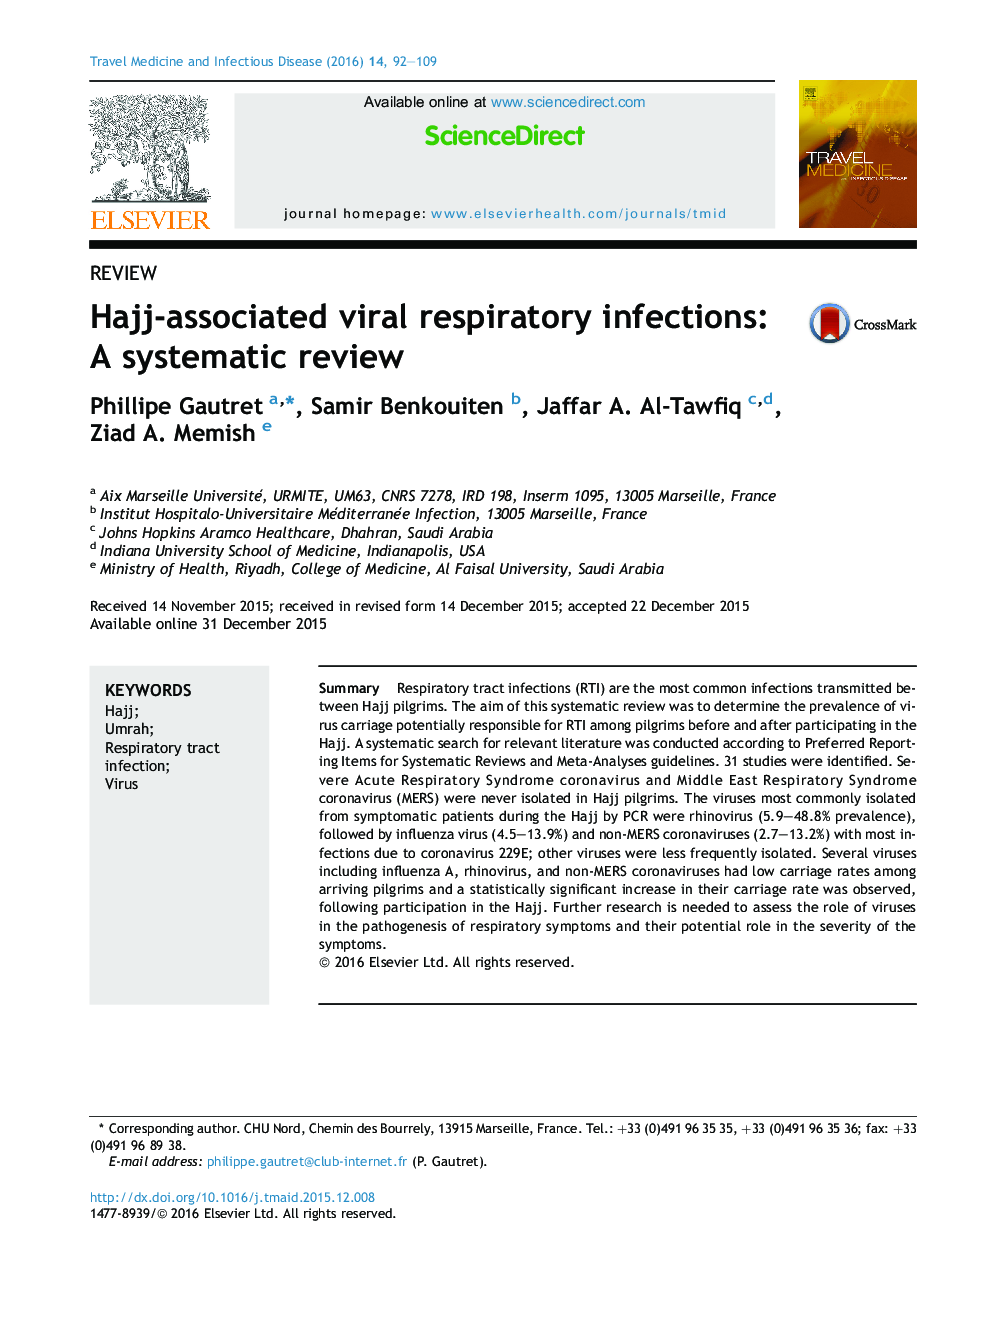 Hajj-associated viral respiratory infections: A systematic review